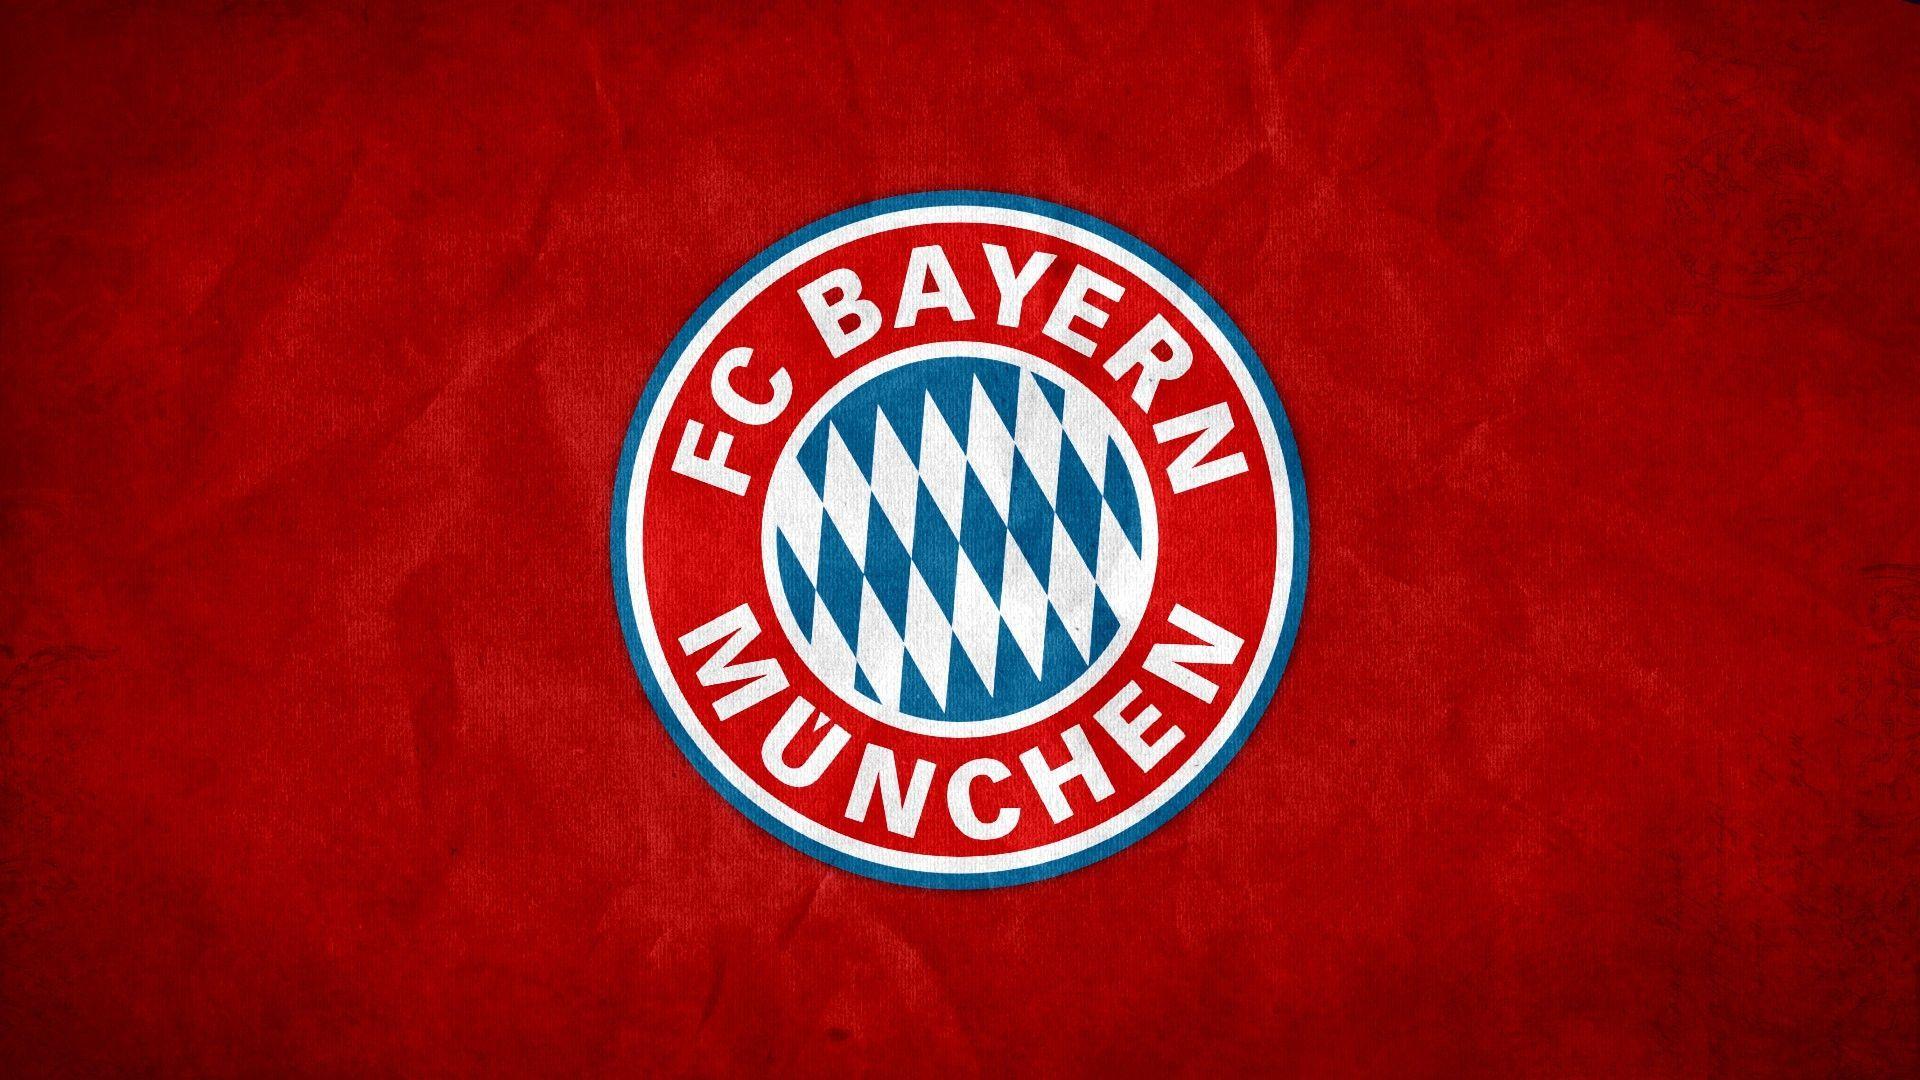 Bayern Munchen HD Wallpapers for Desktop, iPhone, iPad, and Android